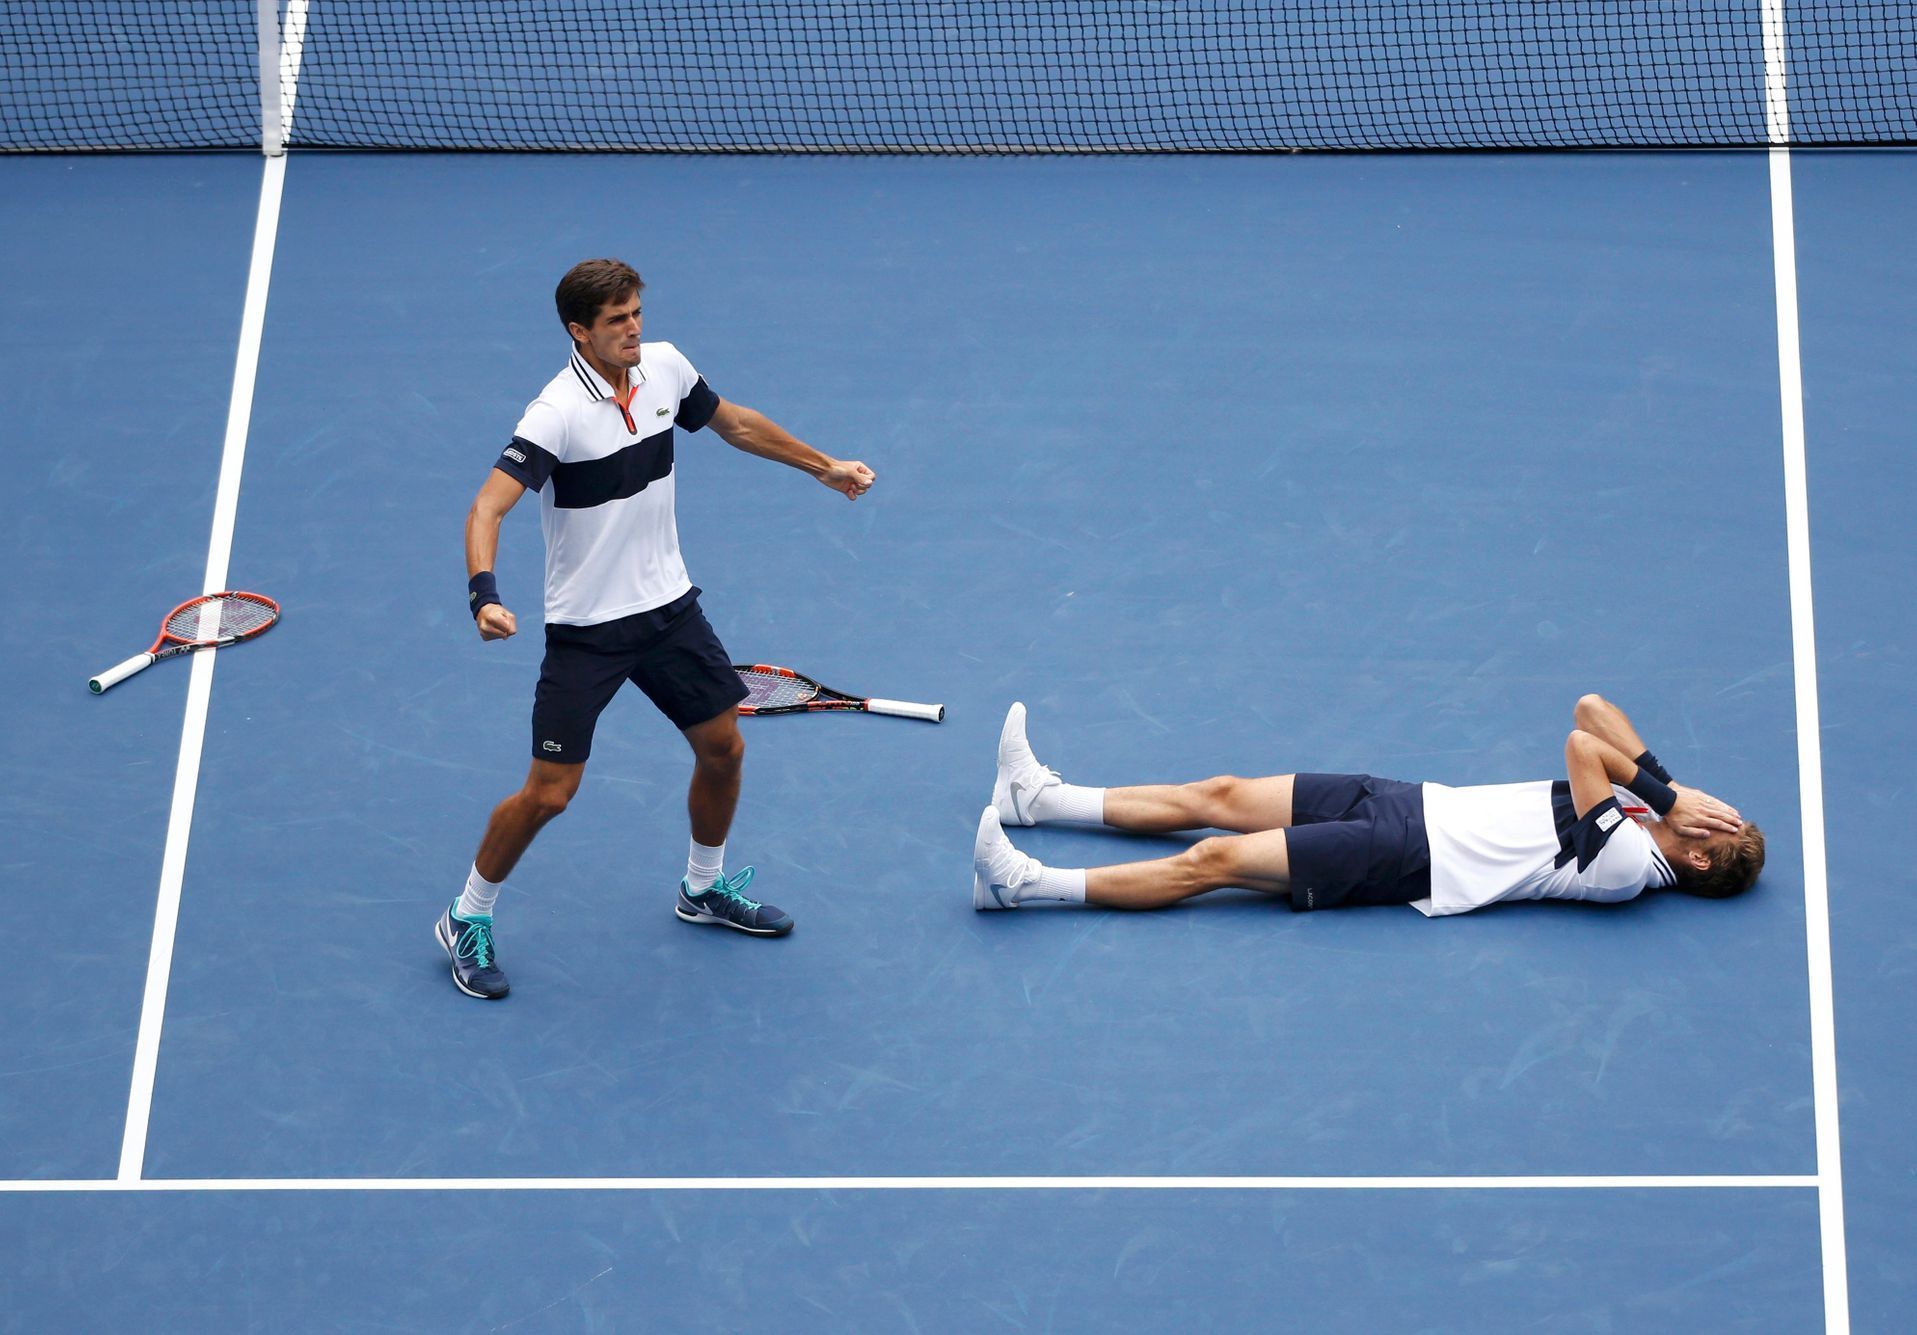 Herbert and Mahut of France celebrate after defeating Murray of Britain and Peers of Australia in the men's doubles final match at the U.S. Open Championships tennis tournament in New York